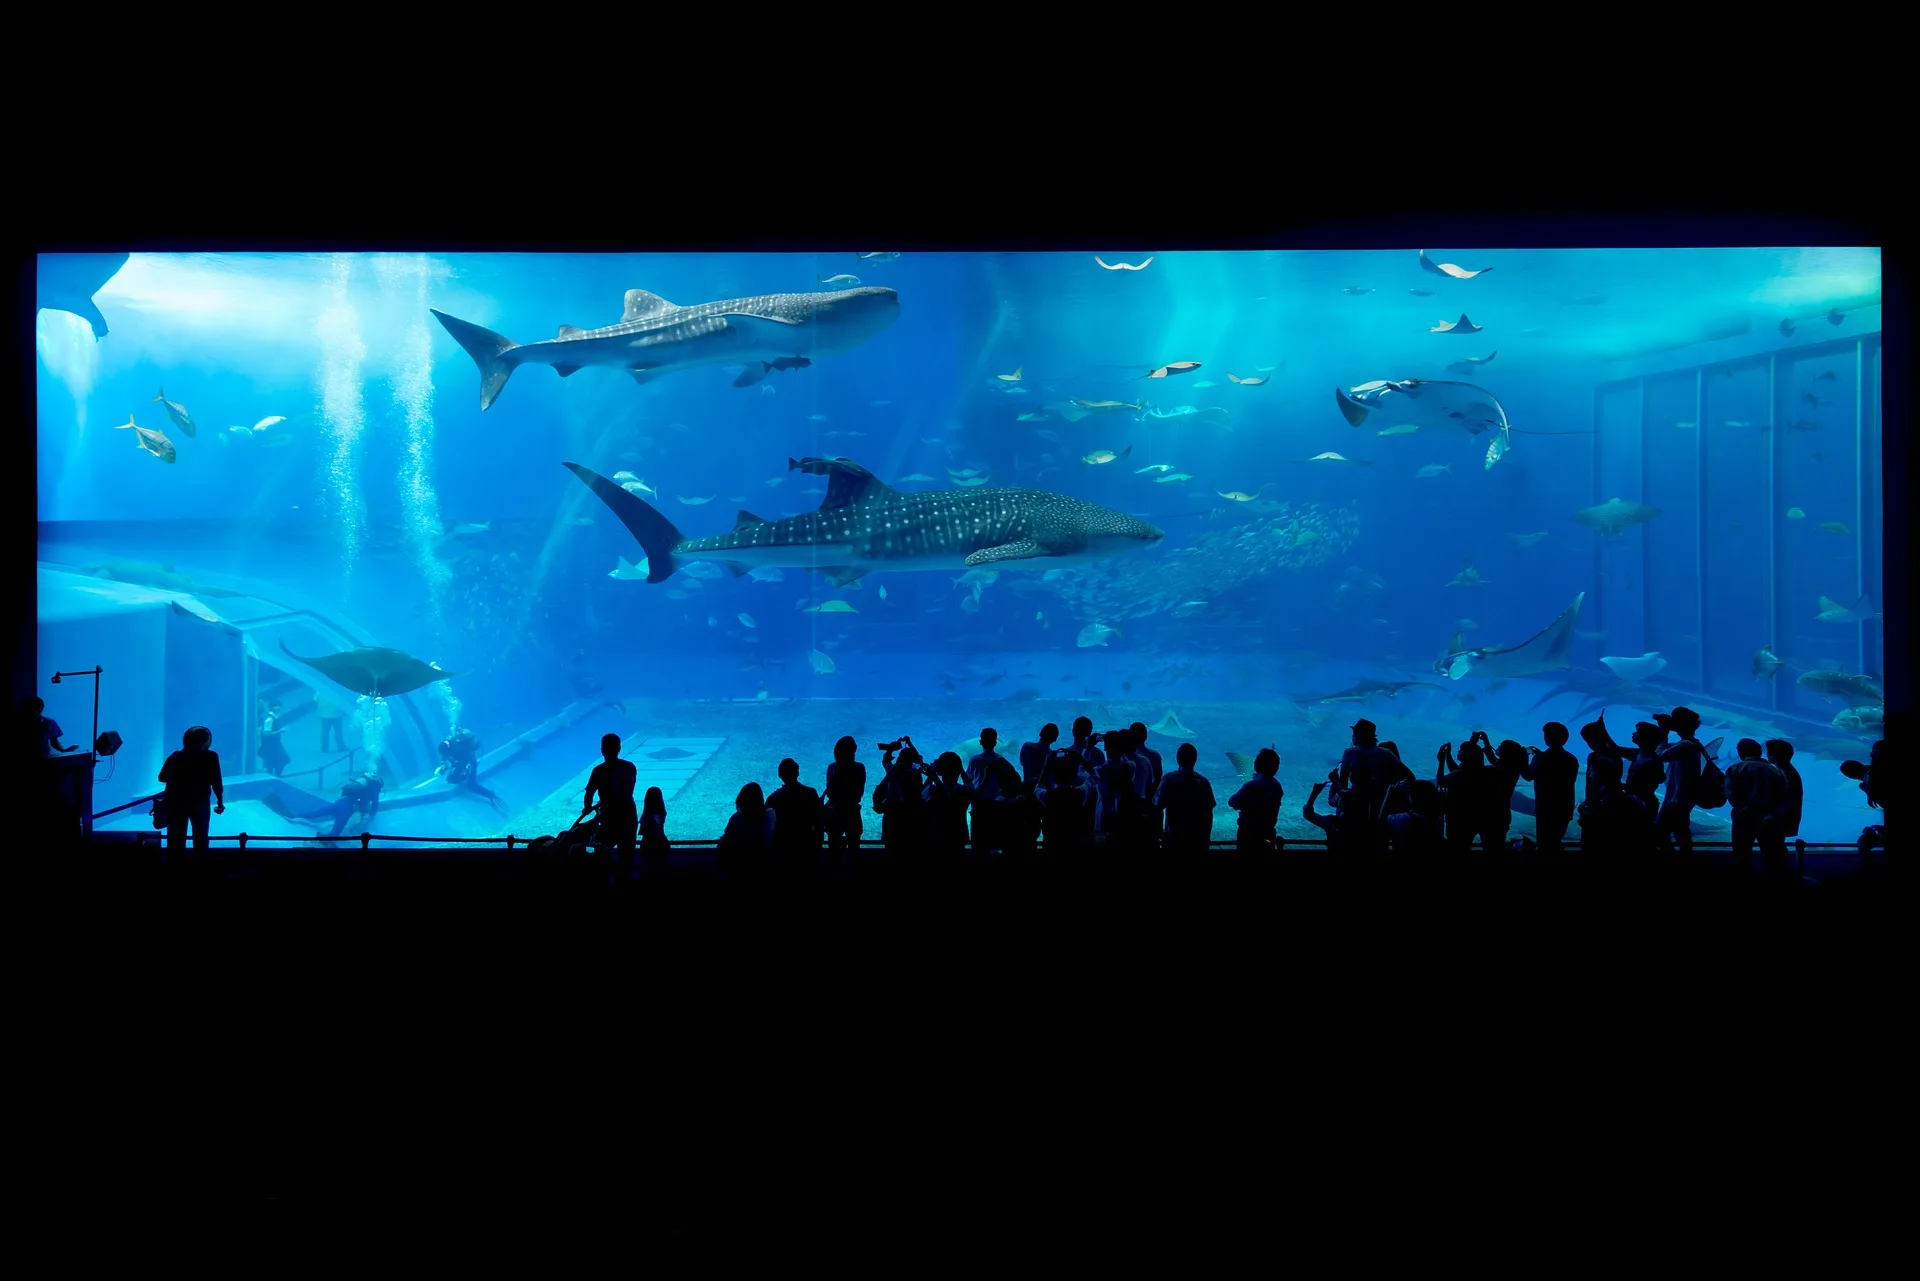 Group of people standing in front of an aquairum